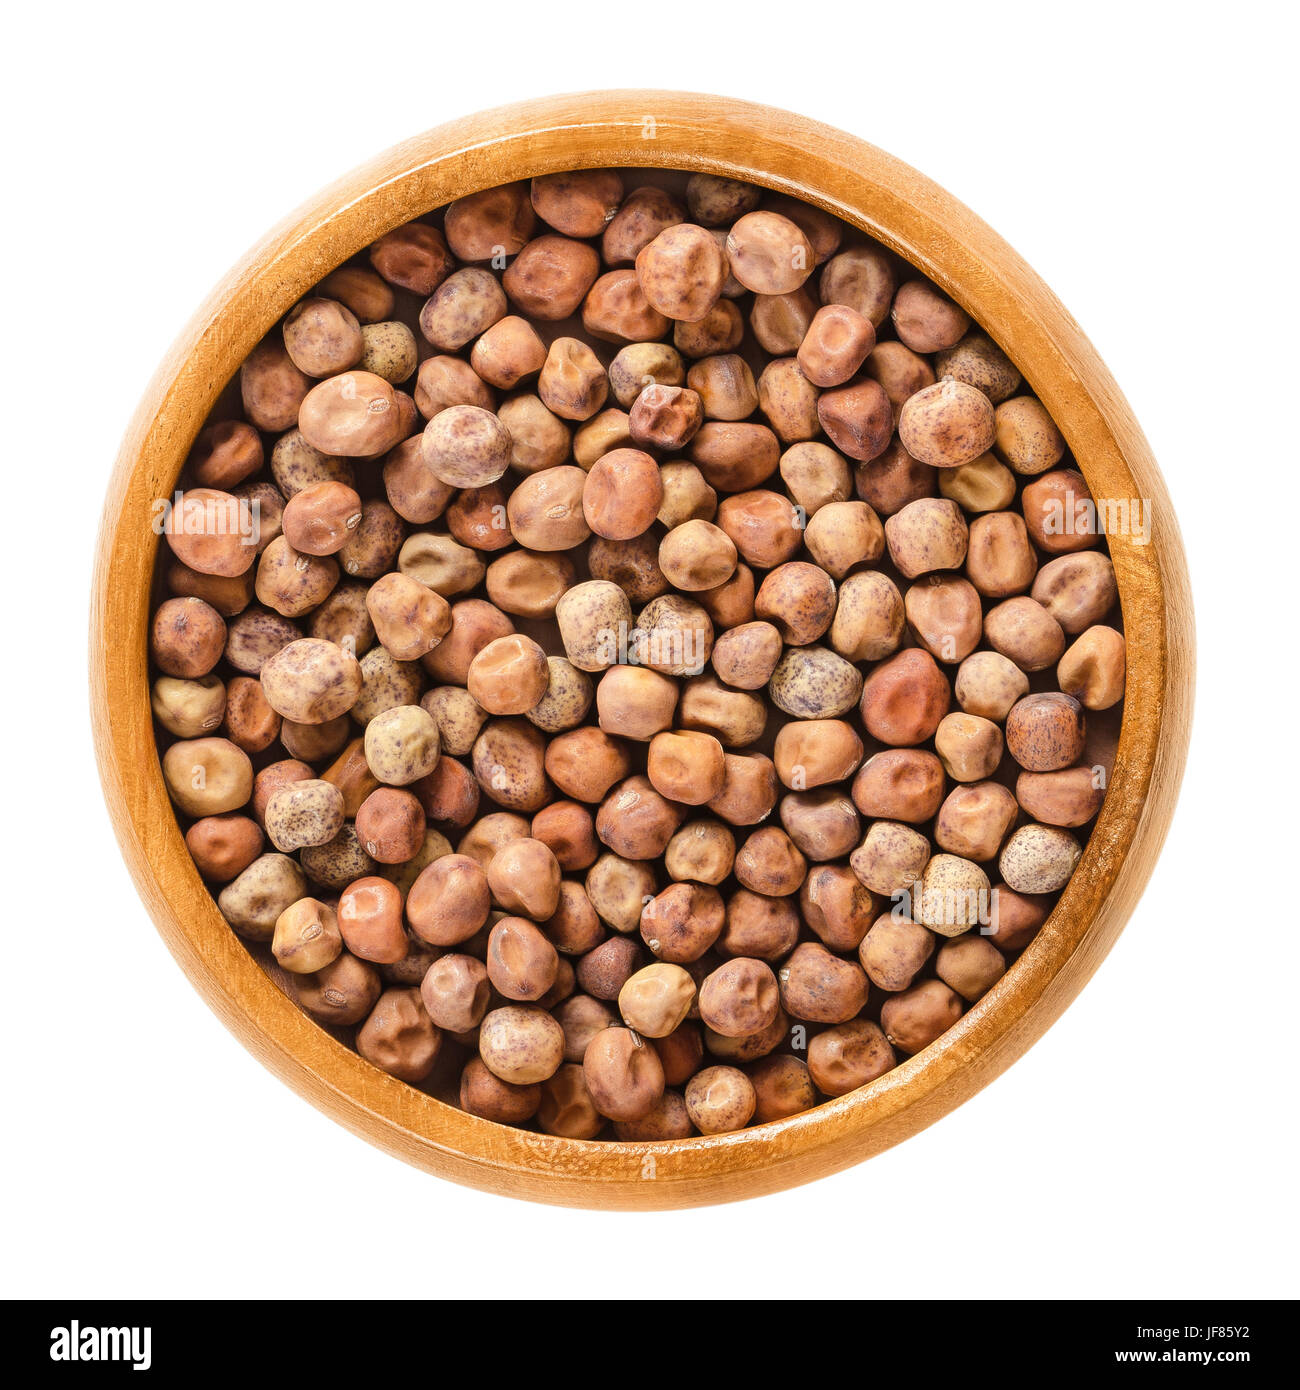 Dried snow pea seeds in wooden bowl. Light brown spherical seeds from the pods of Pisum sativum saccharatum, a legume and variety of pea. Stock Photo